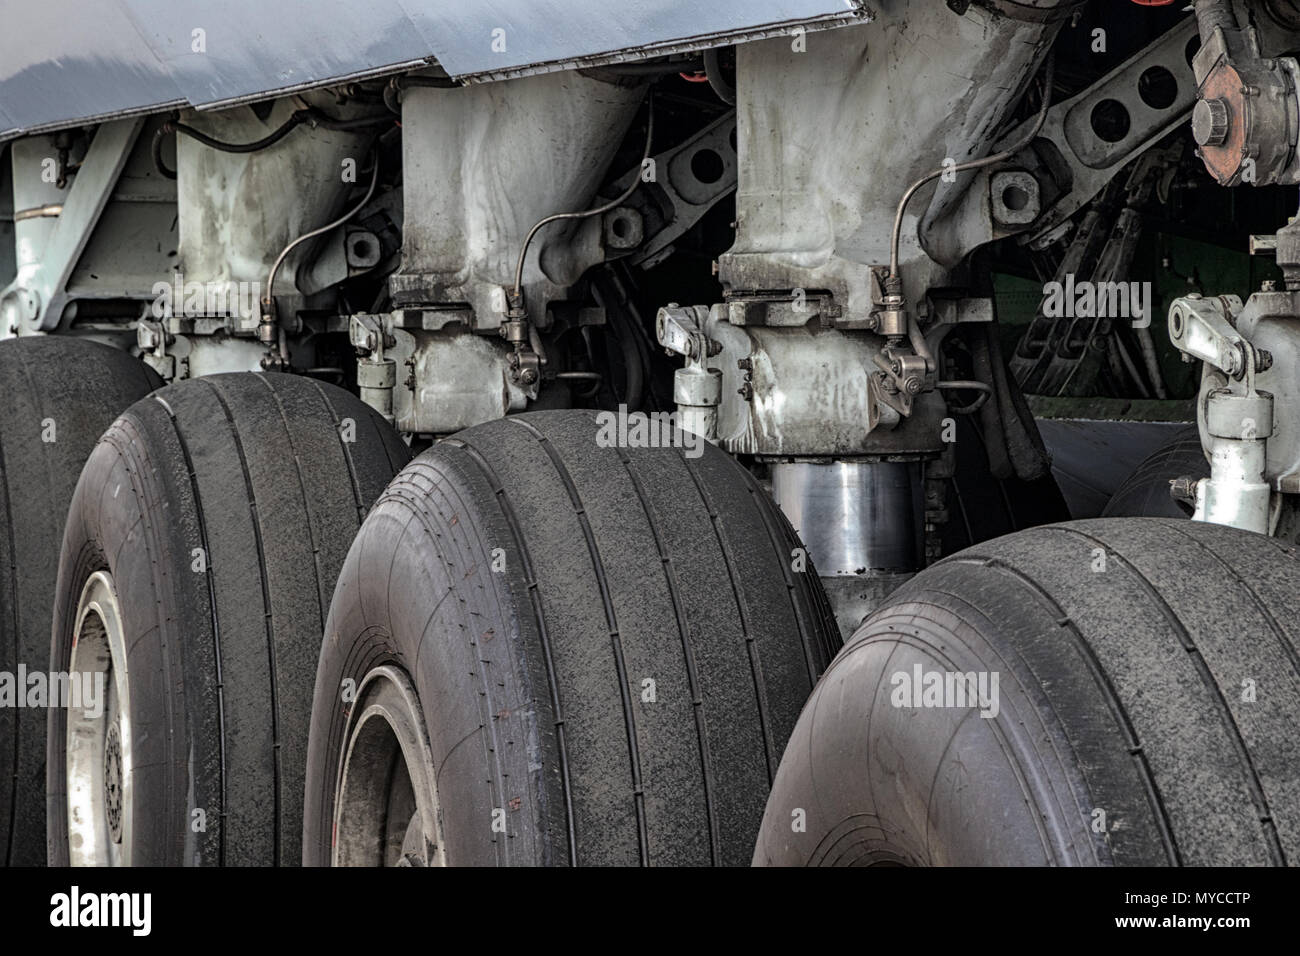 Close up view of a row of tires on the main landing gear of a large transport plane. Stock Photo